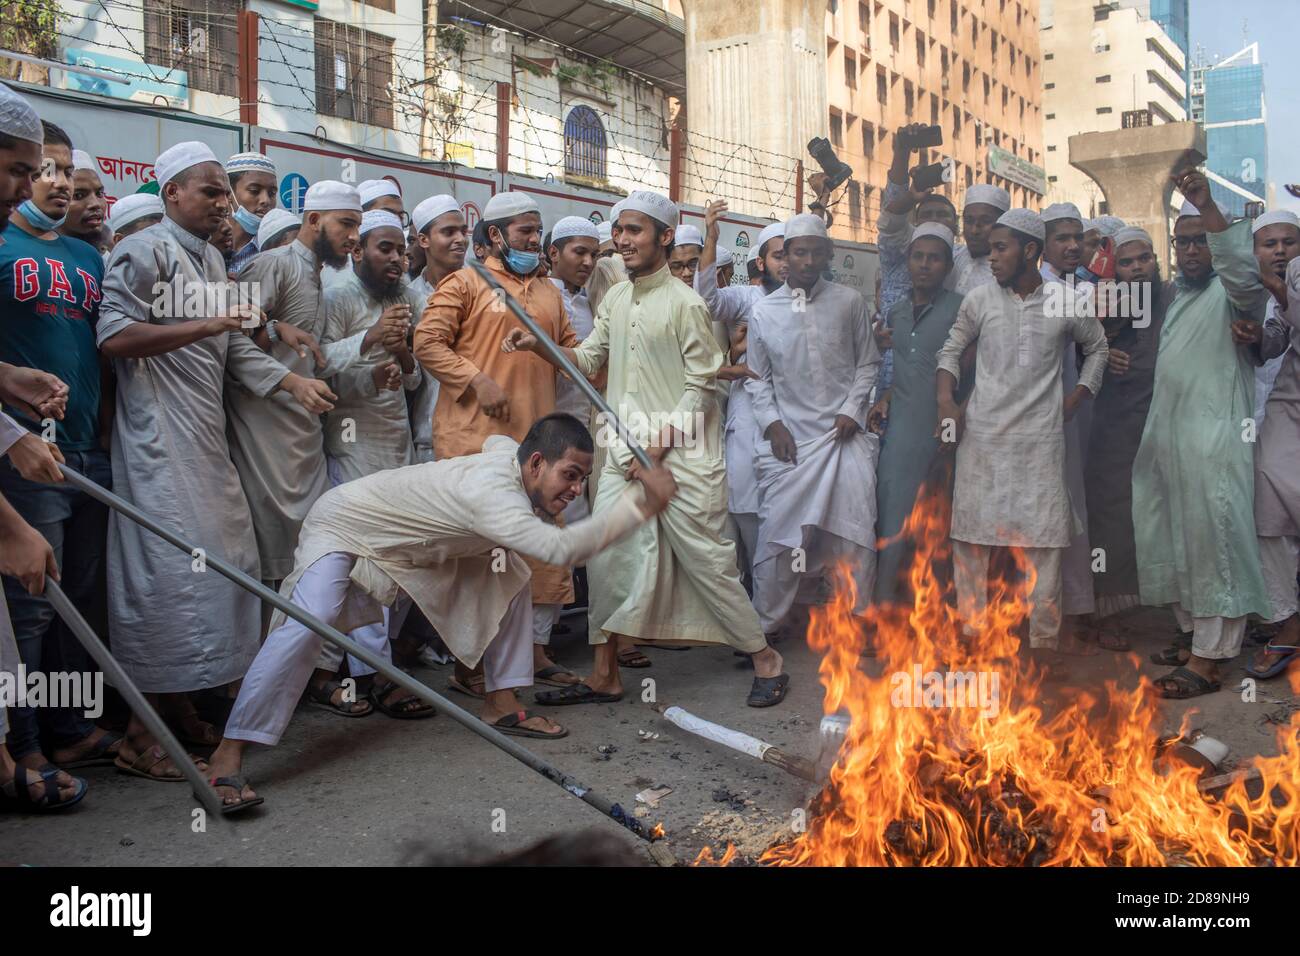 Leaders and activists of the Islami Oikya Jote, an Islamist political party, burn an effigy of French president Emmanuel Macron during the protest against French President in Dhaka.Thousands of Muslim protesters hold a march calling for the boycott of French products and denouncing French president Emmanuel Macron for his remarks ‘not to give up cartoons depicting Prophet Mohammed'. Macron's remarks came in response to the beheading of a teacher, Samuel Paty, outside his school in a suburb outside Paris earlier this month, after he had shown cartoons of the Prophet Mohammed during a class he w Stock Photo